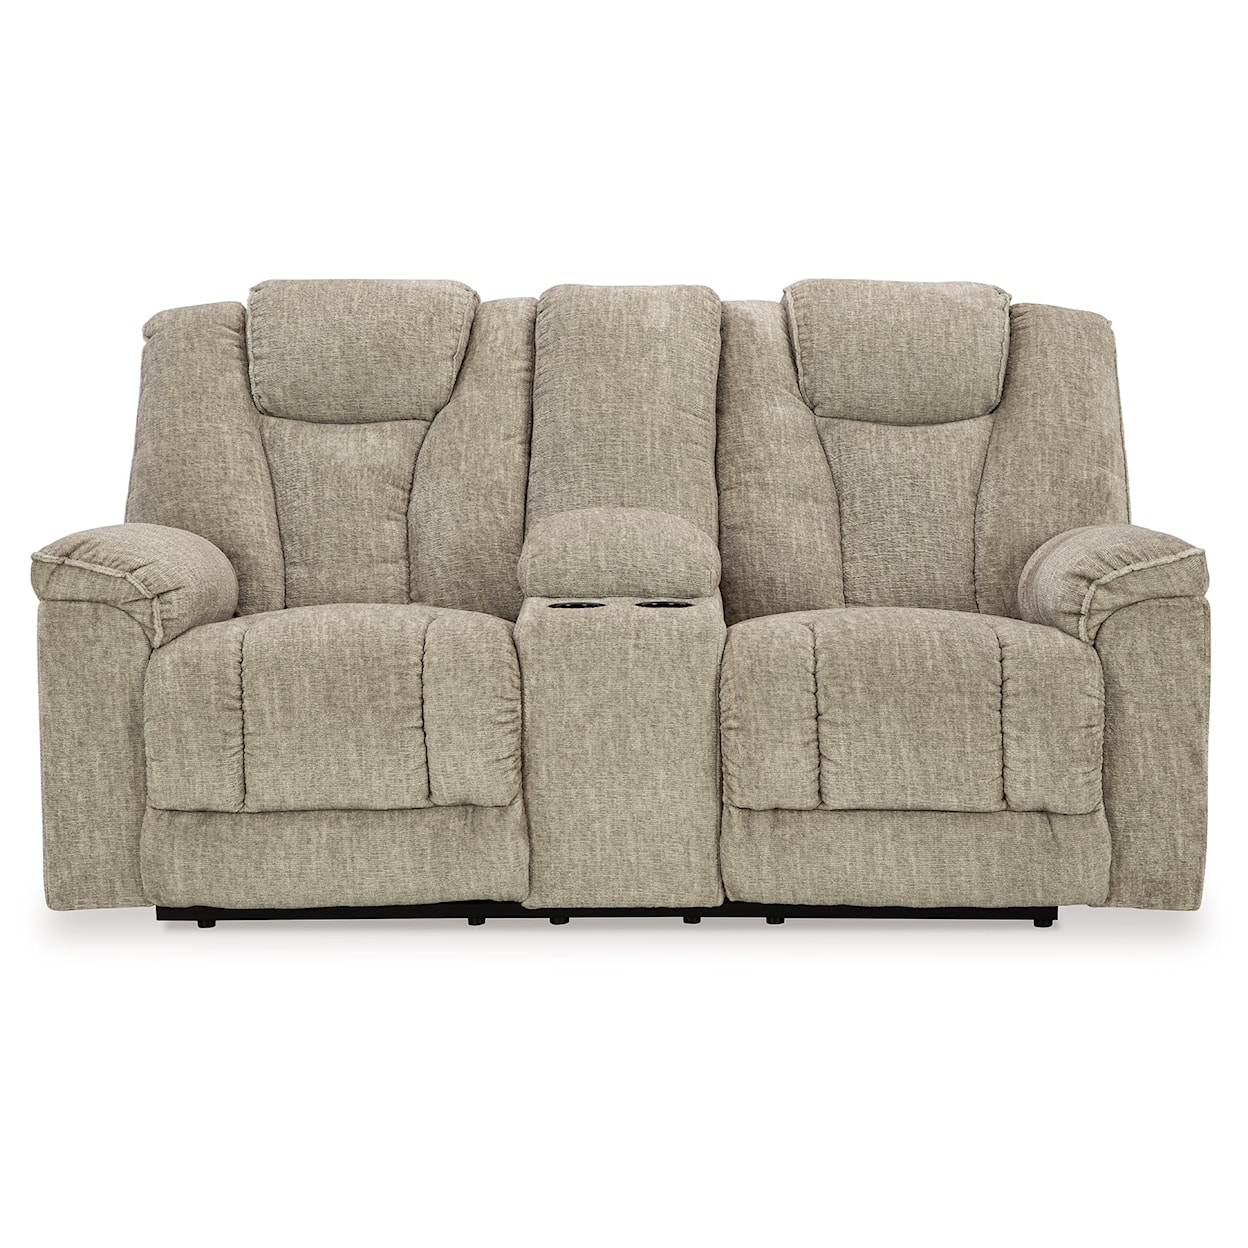 Benchcraft Hindmarsh Power Reclining Loveseat With Console